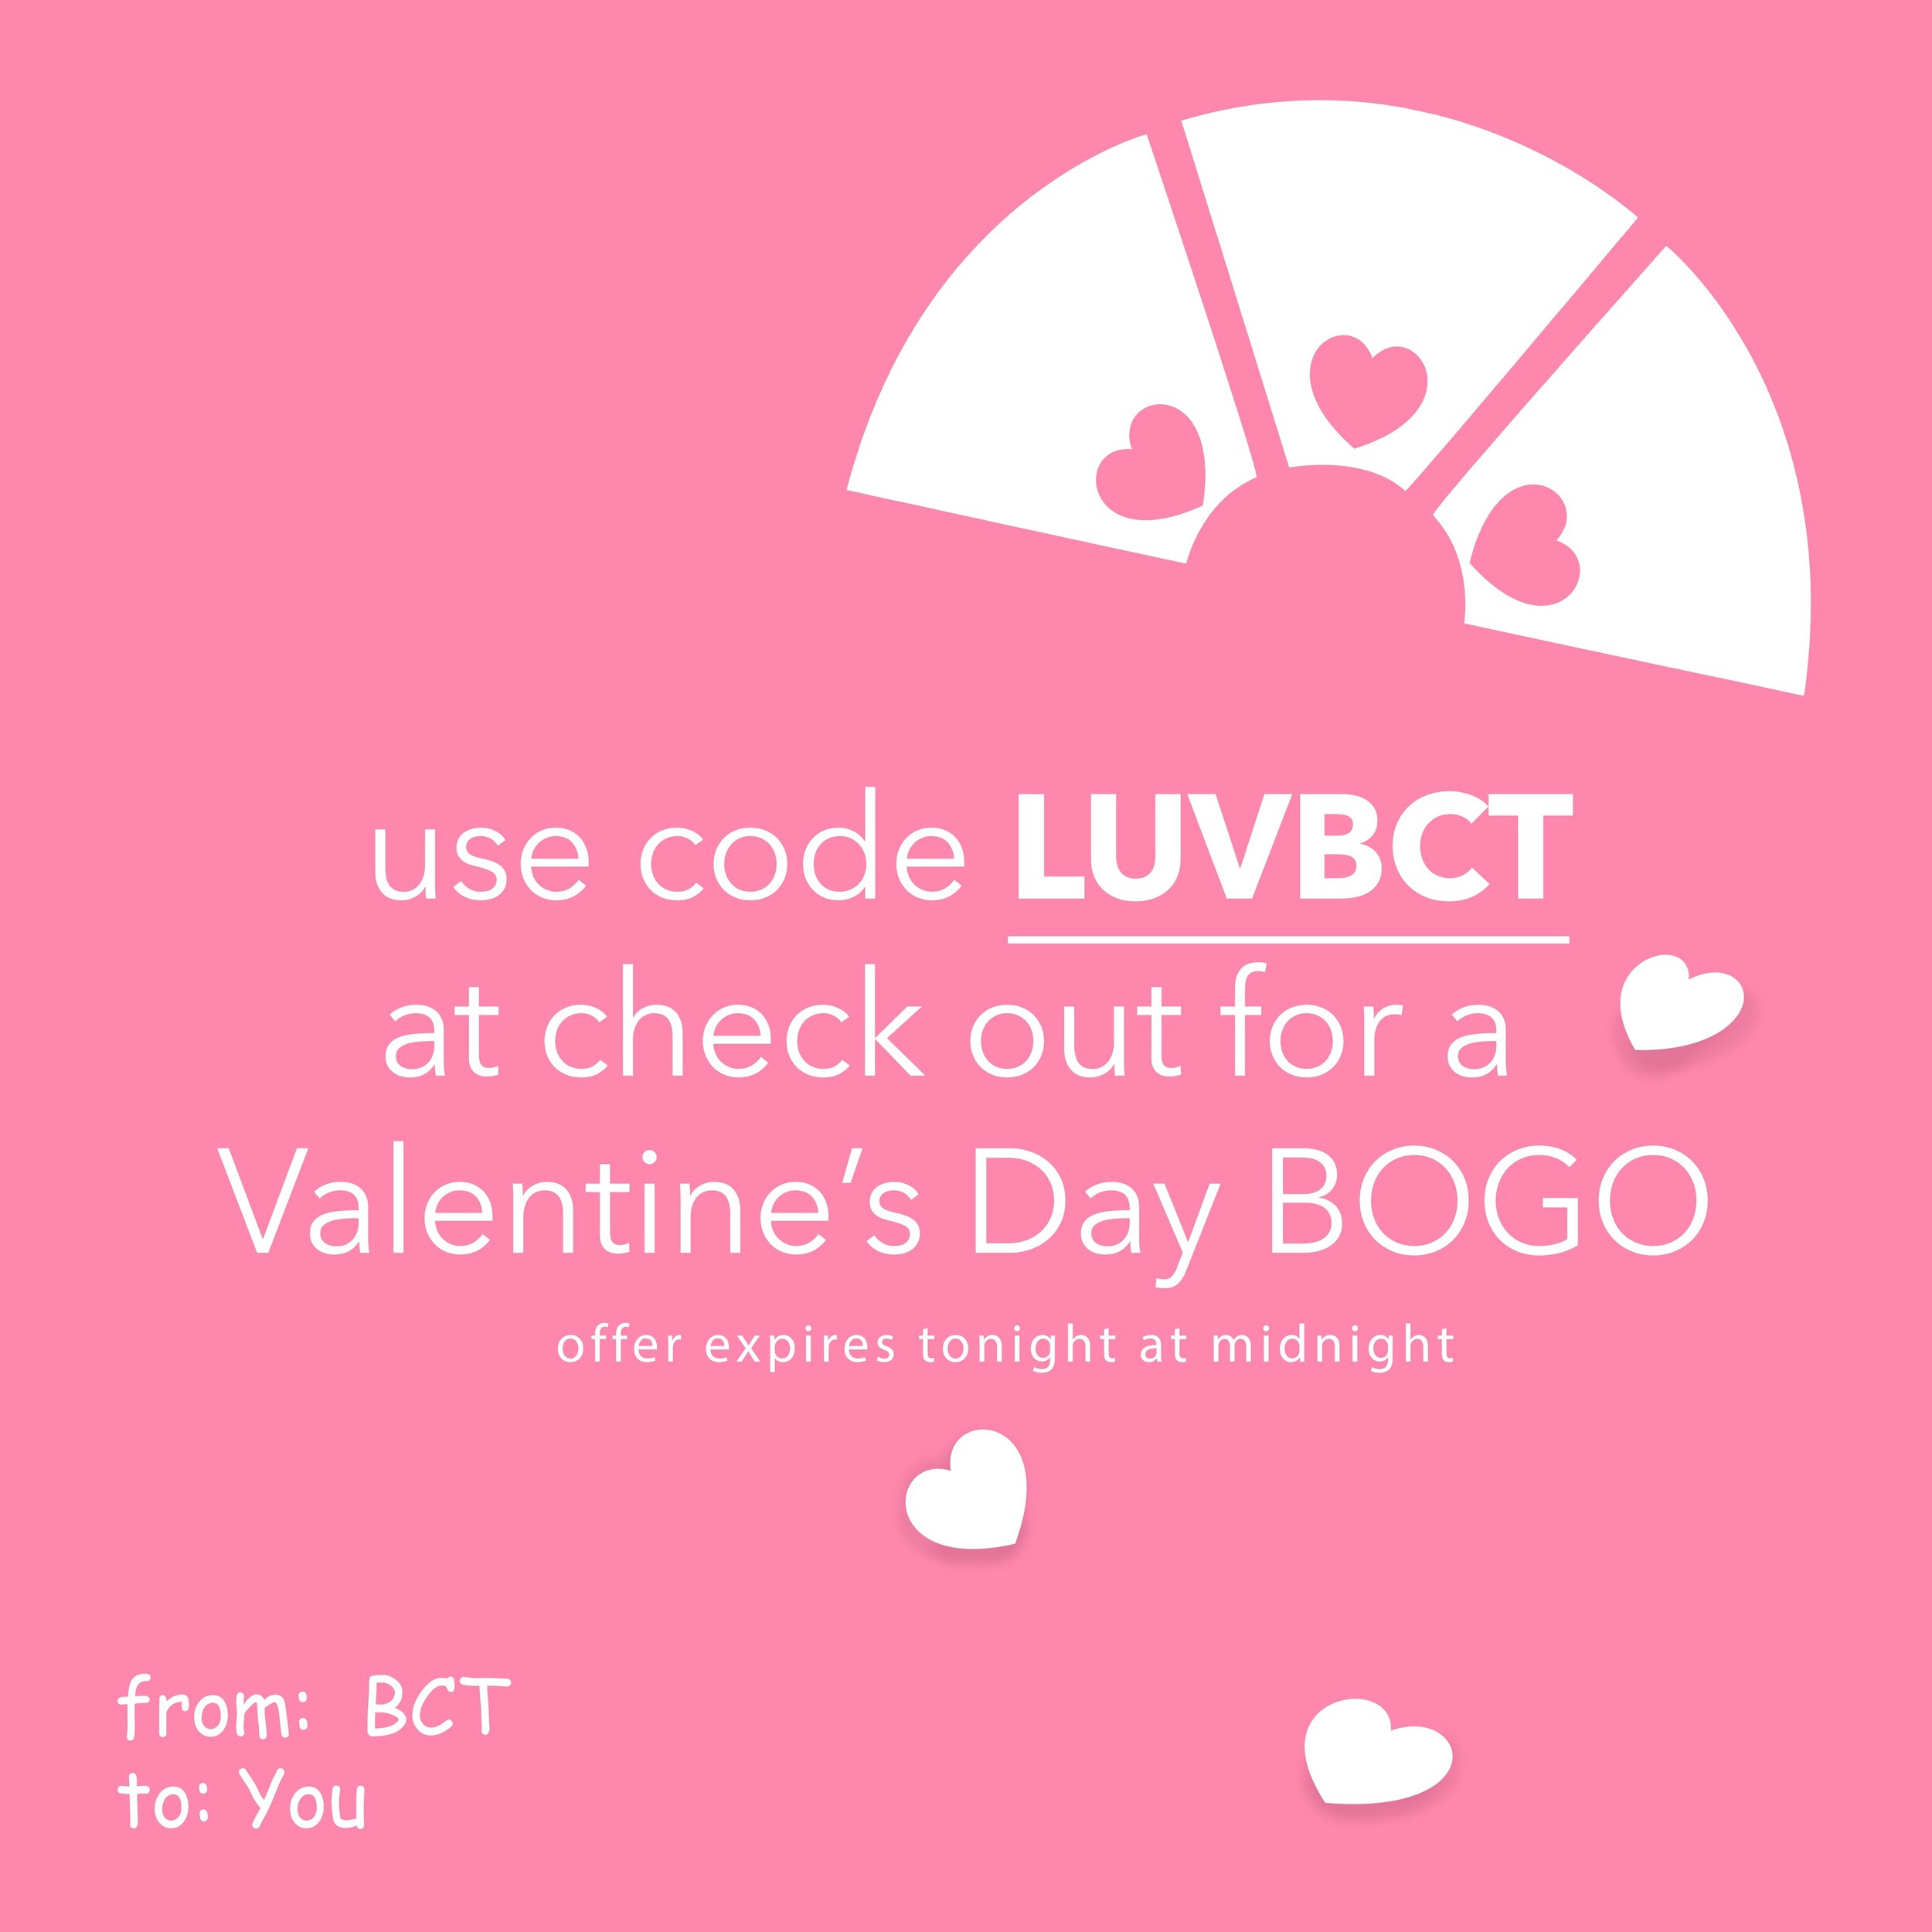 Be our Valentine! TODAY ONLY buy one ticket, get one free on any of our spring shows with code LUVBCT.

Offer good for public performances of &lsquo;Mr. Chickee&rsquo;s Funny Money&rdquo; | &ldquo;Presenting Super Cat and Reptile Robot in the Tremend